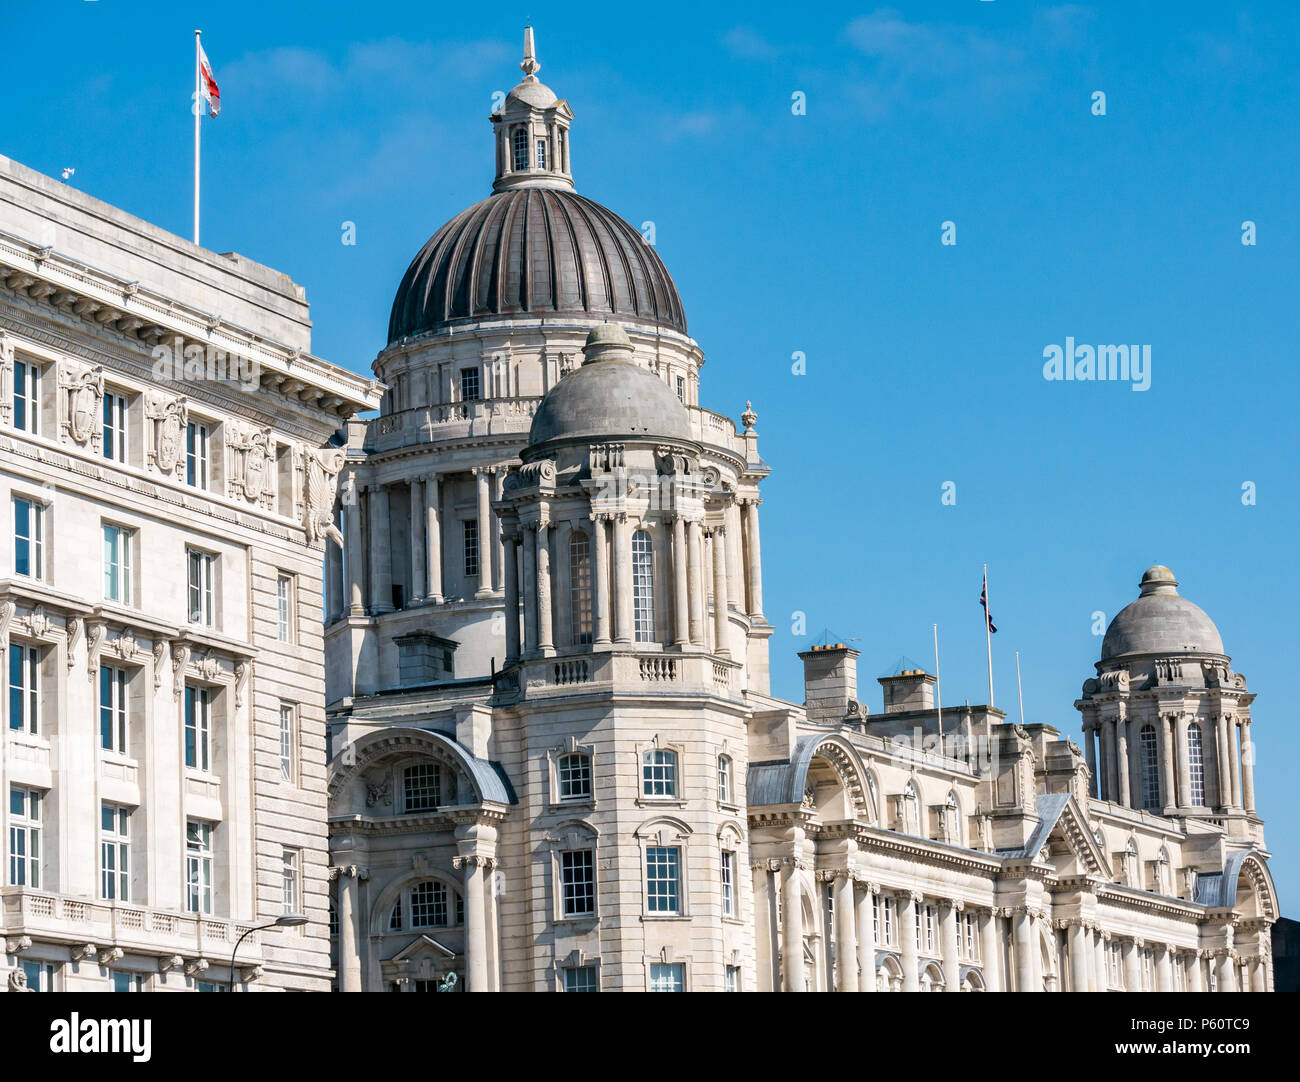 Three Graces, Cunard building and dome of  Edwardian Baroque Port of Liverpool building, Pier Head, Liverpool, England, UK with sunshine and blue sky Stock Photo